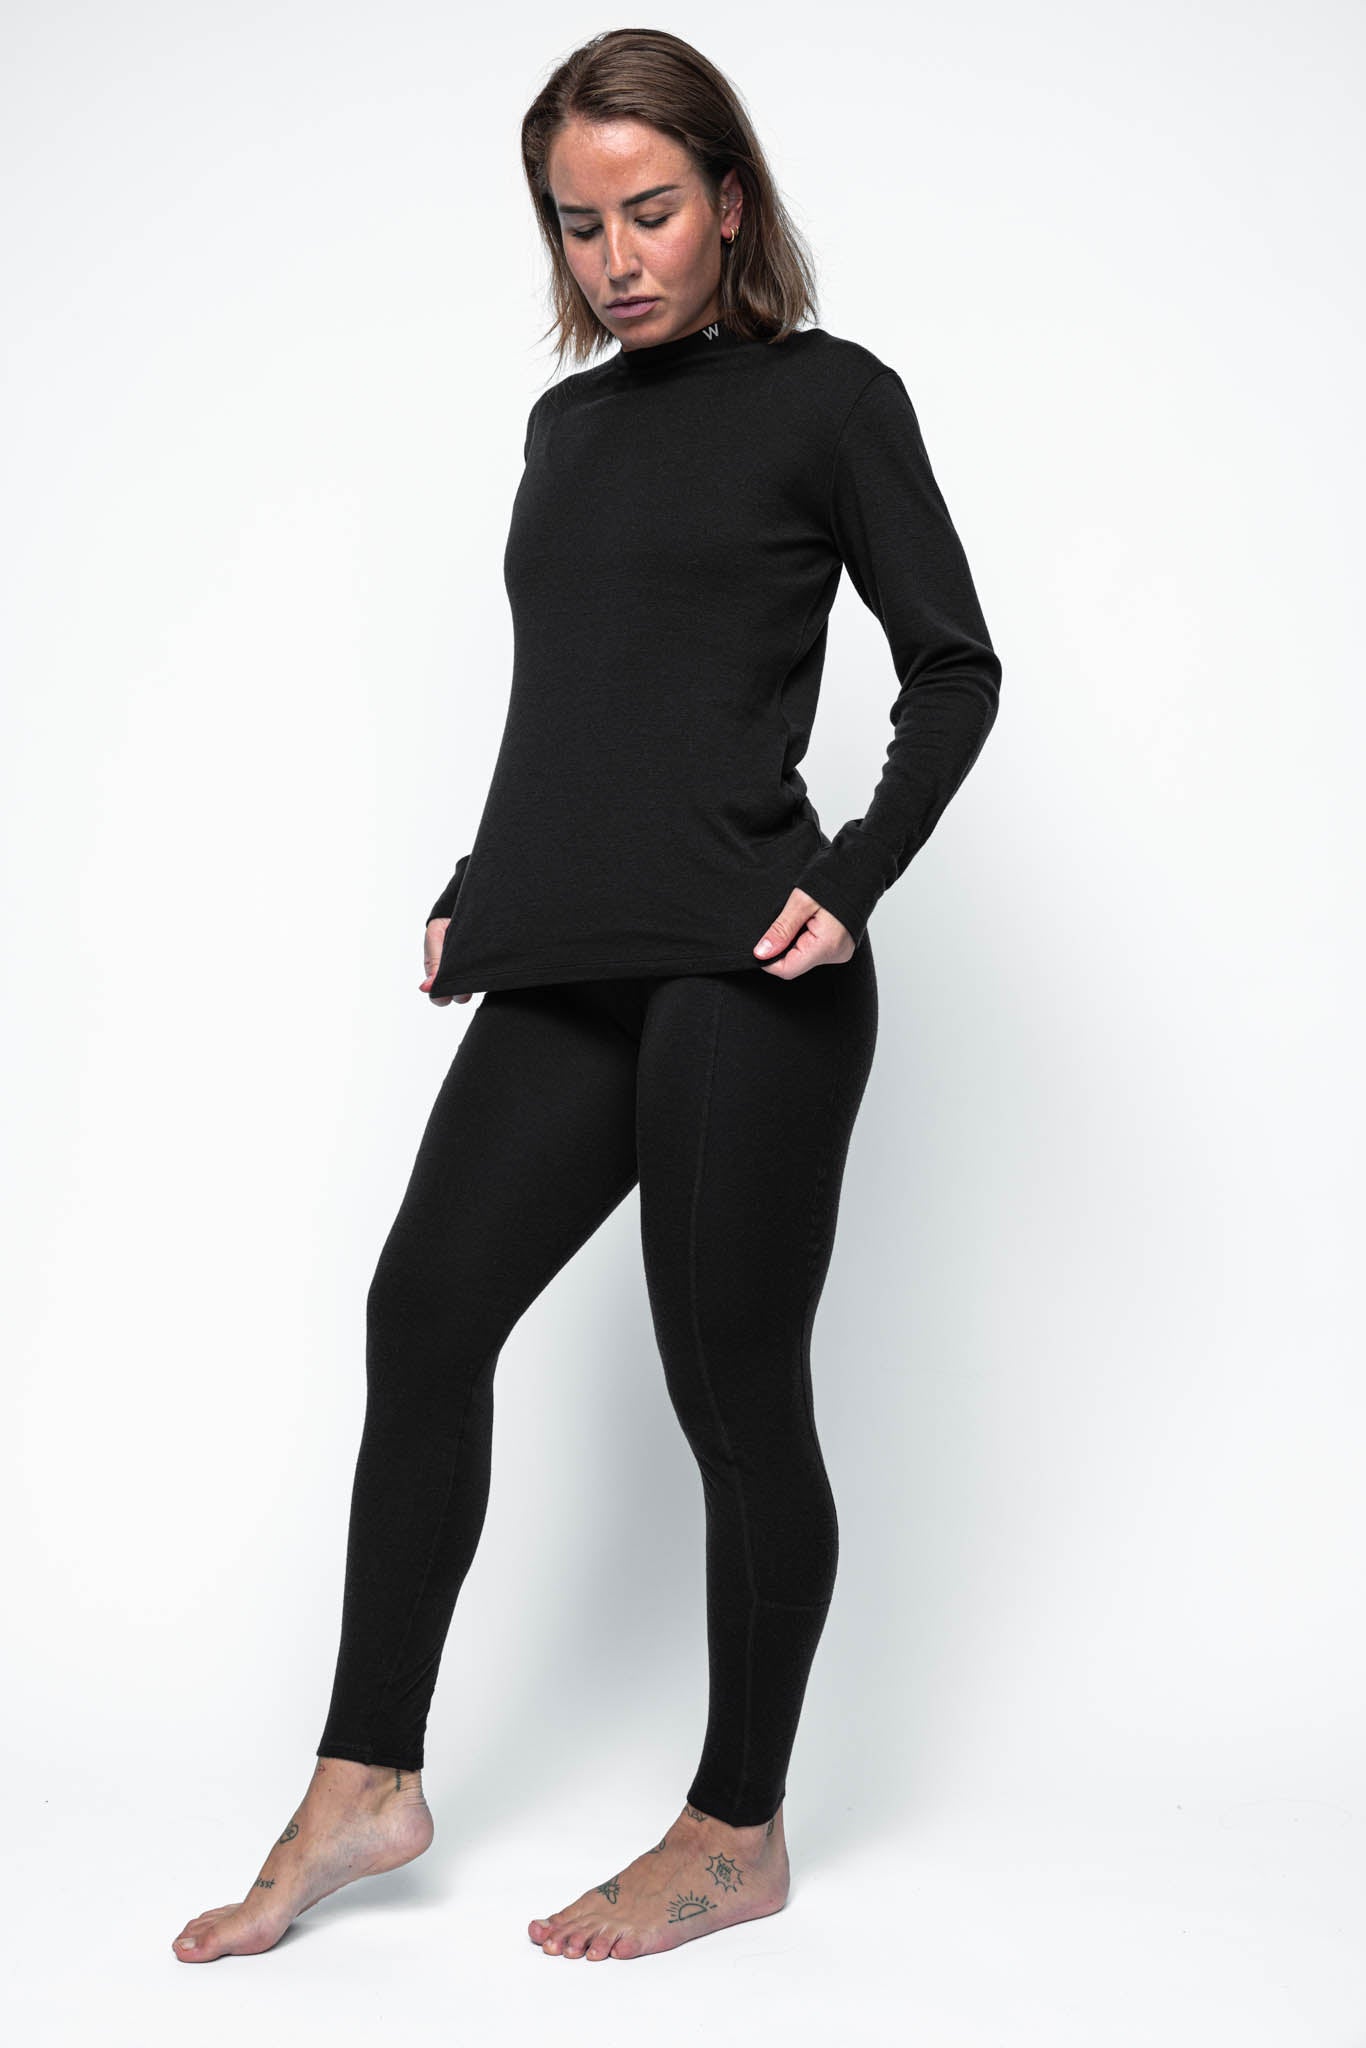 Merino Wool Thermal Set: Womens Midweight Base Layer With Anti Odor Top &  Bottoms From Diao03, $55